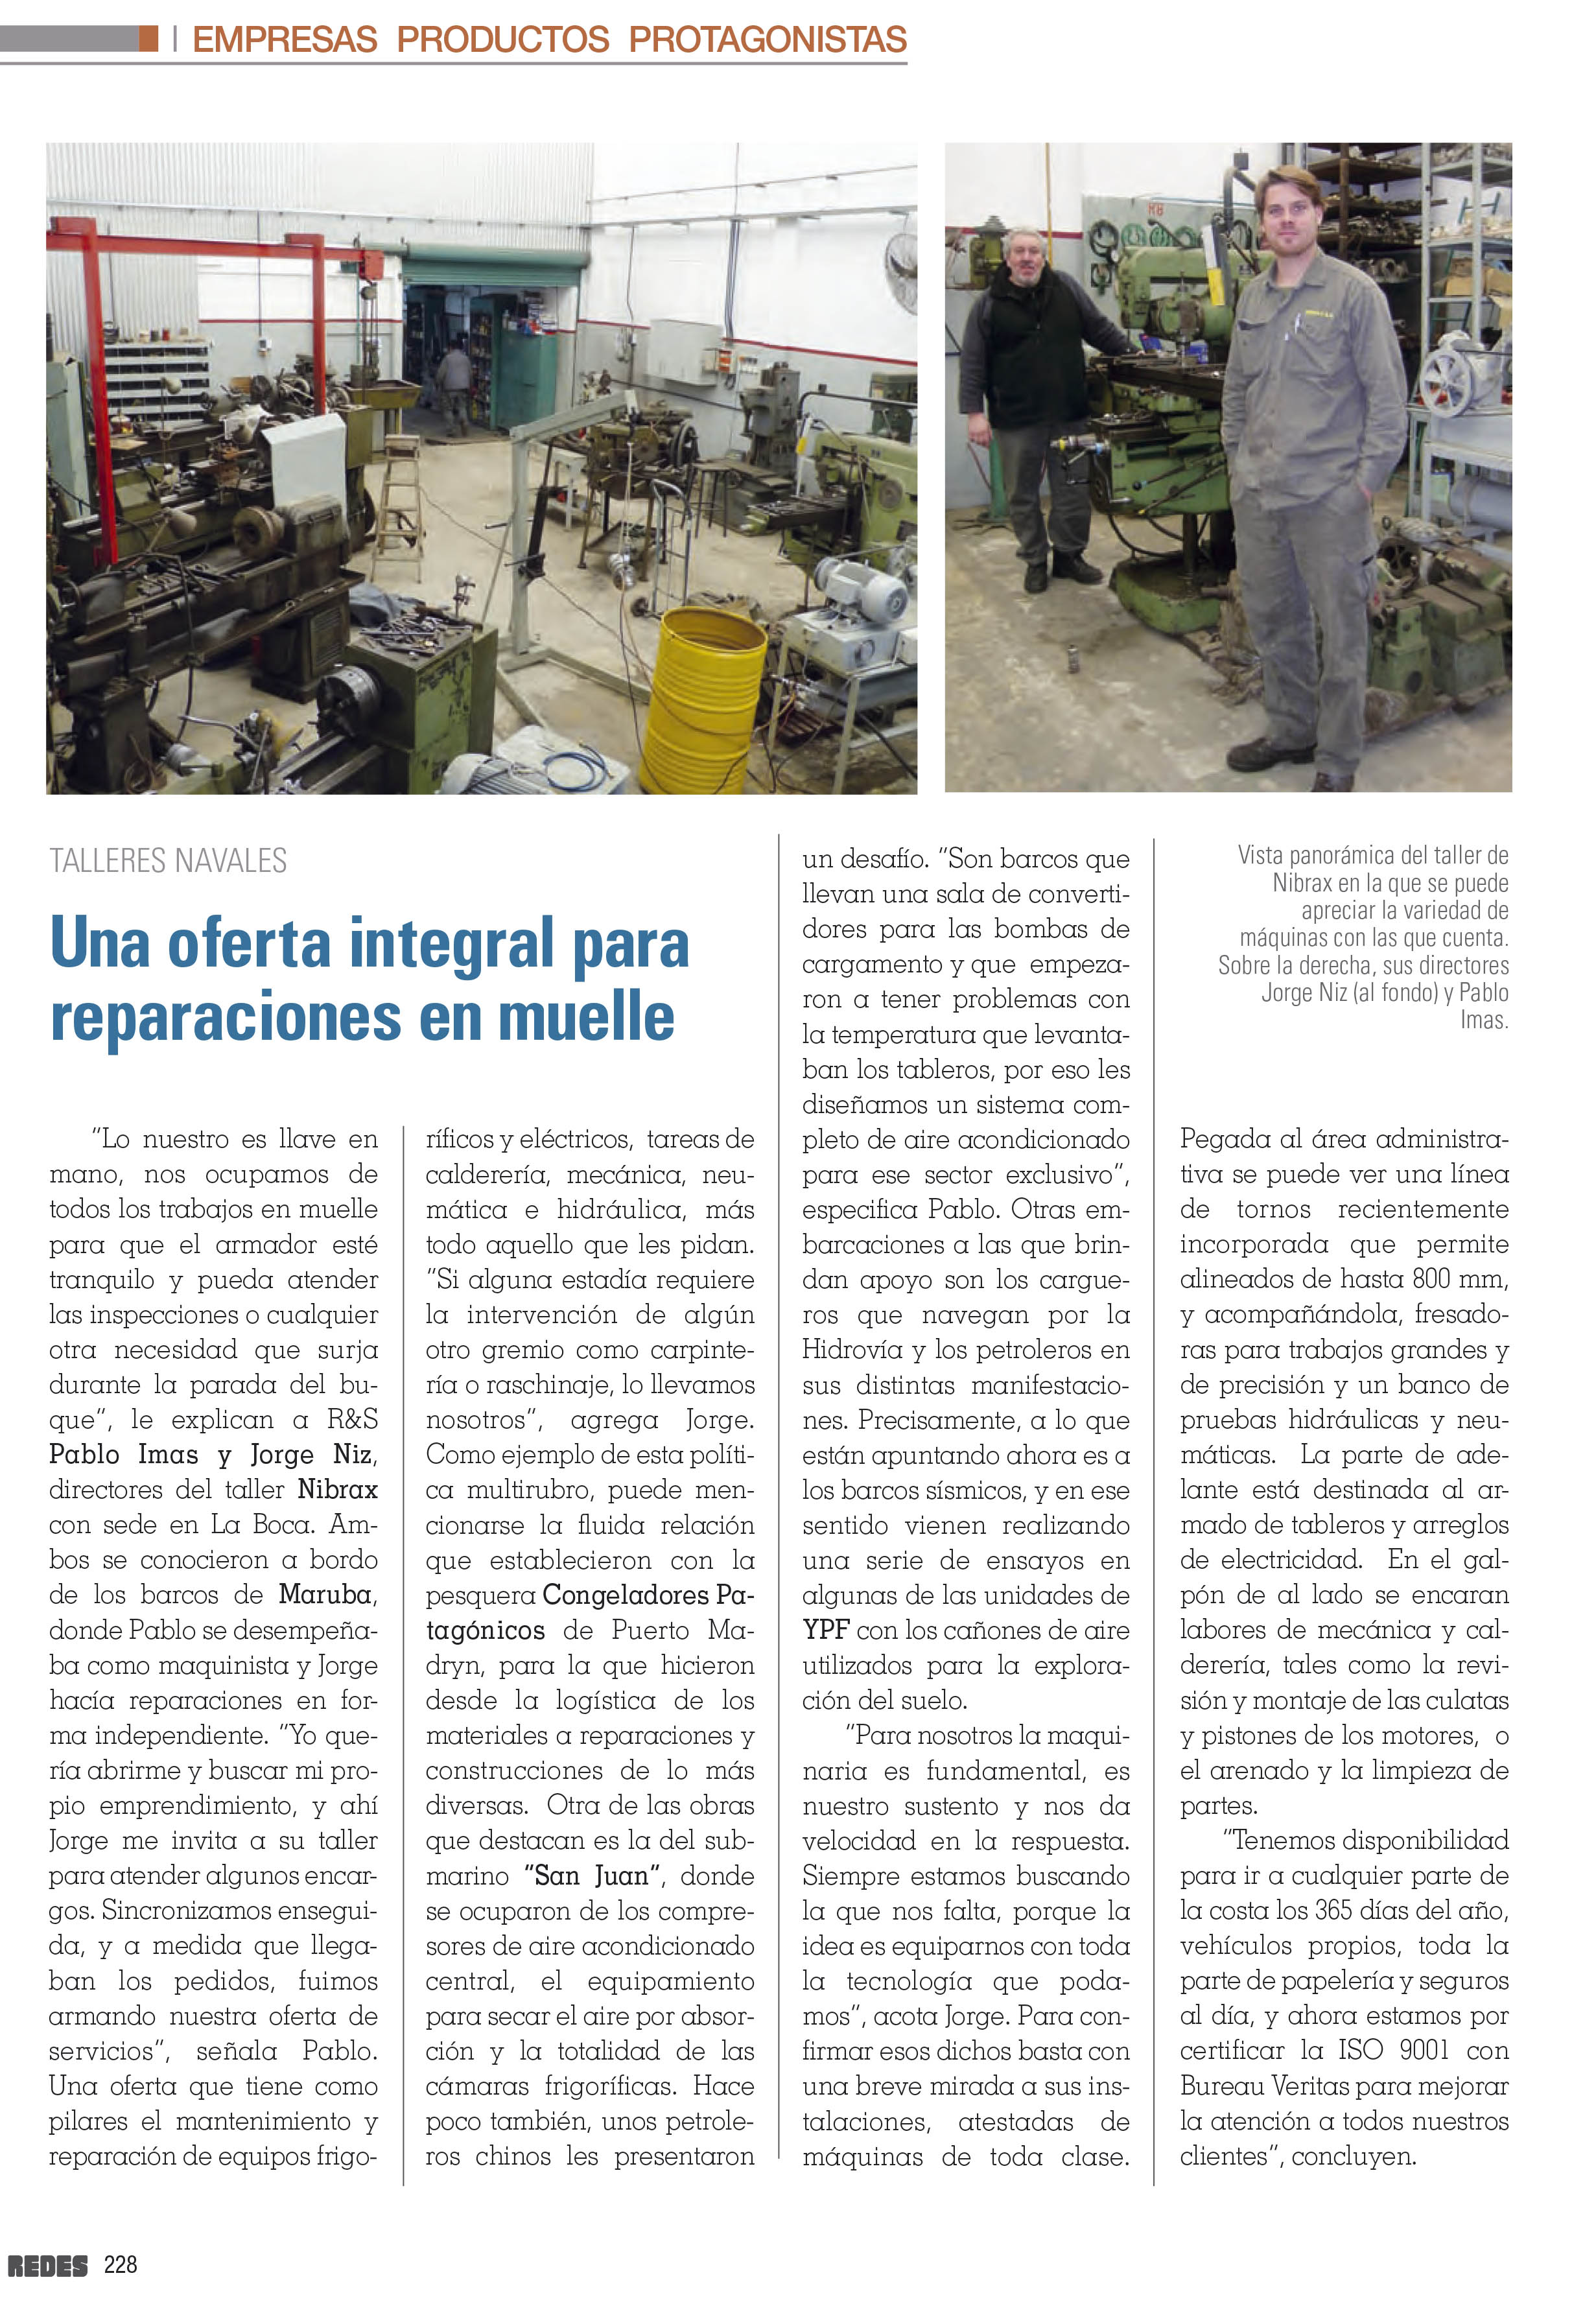 Article published on Redes & Seafood Magazine